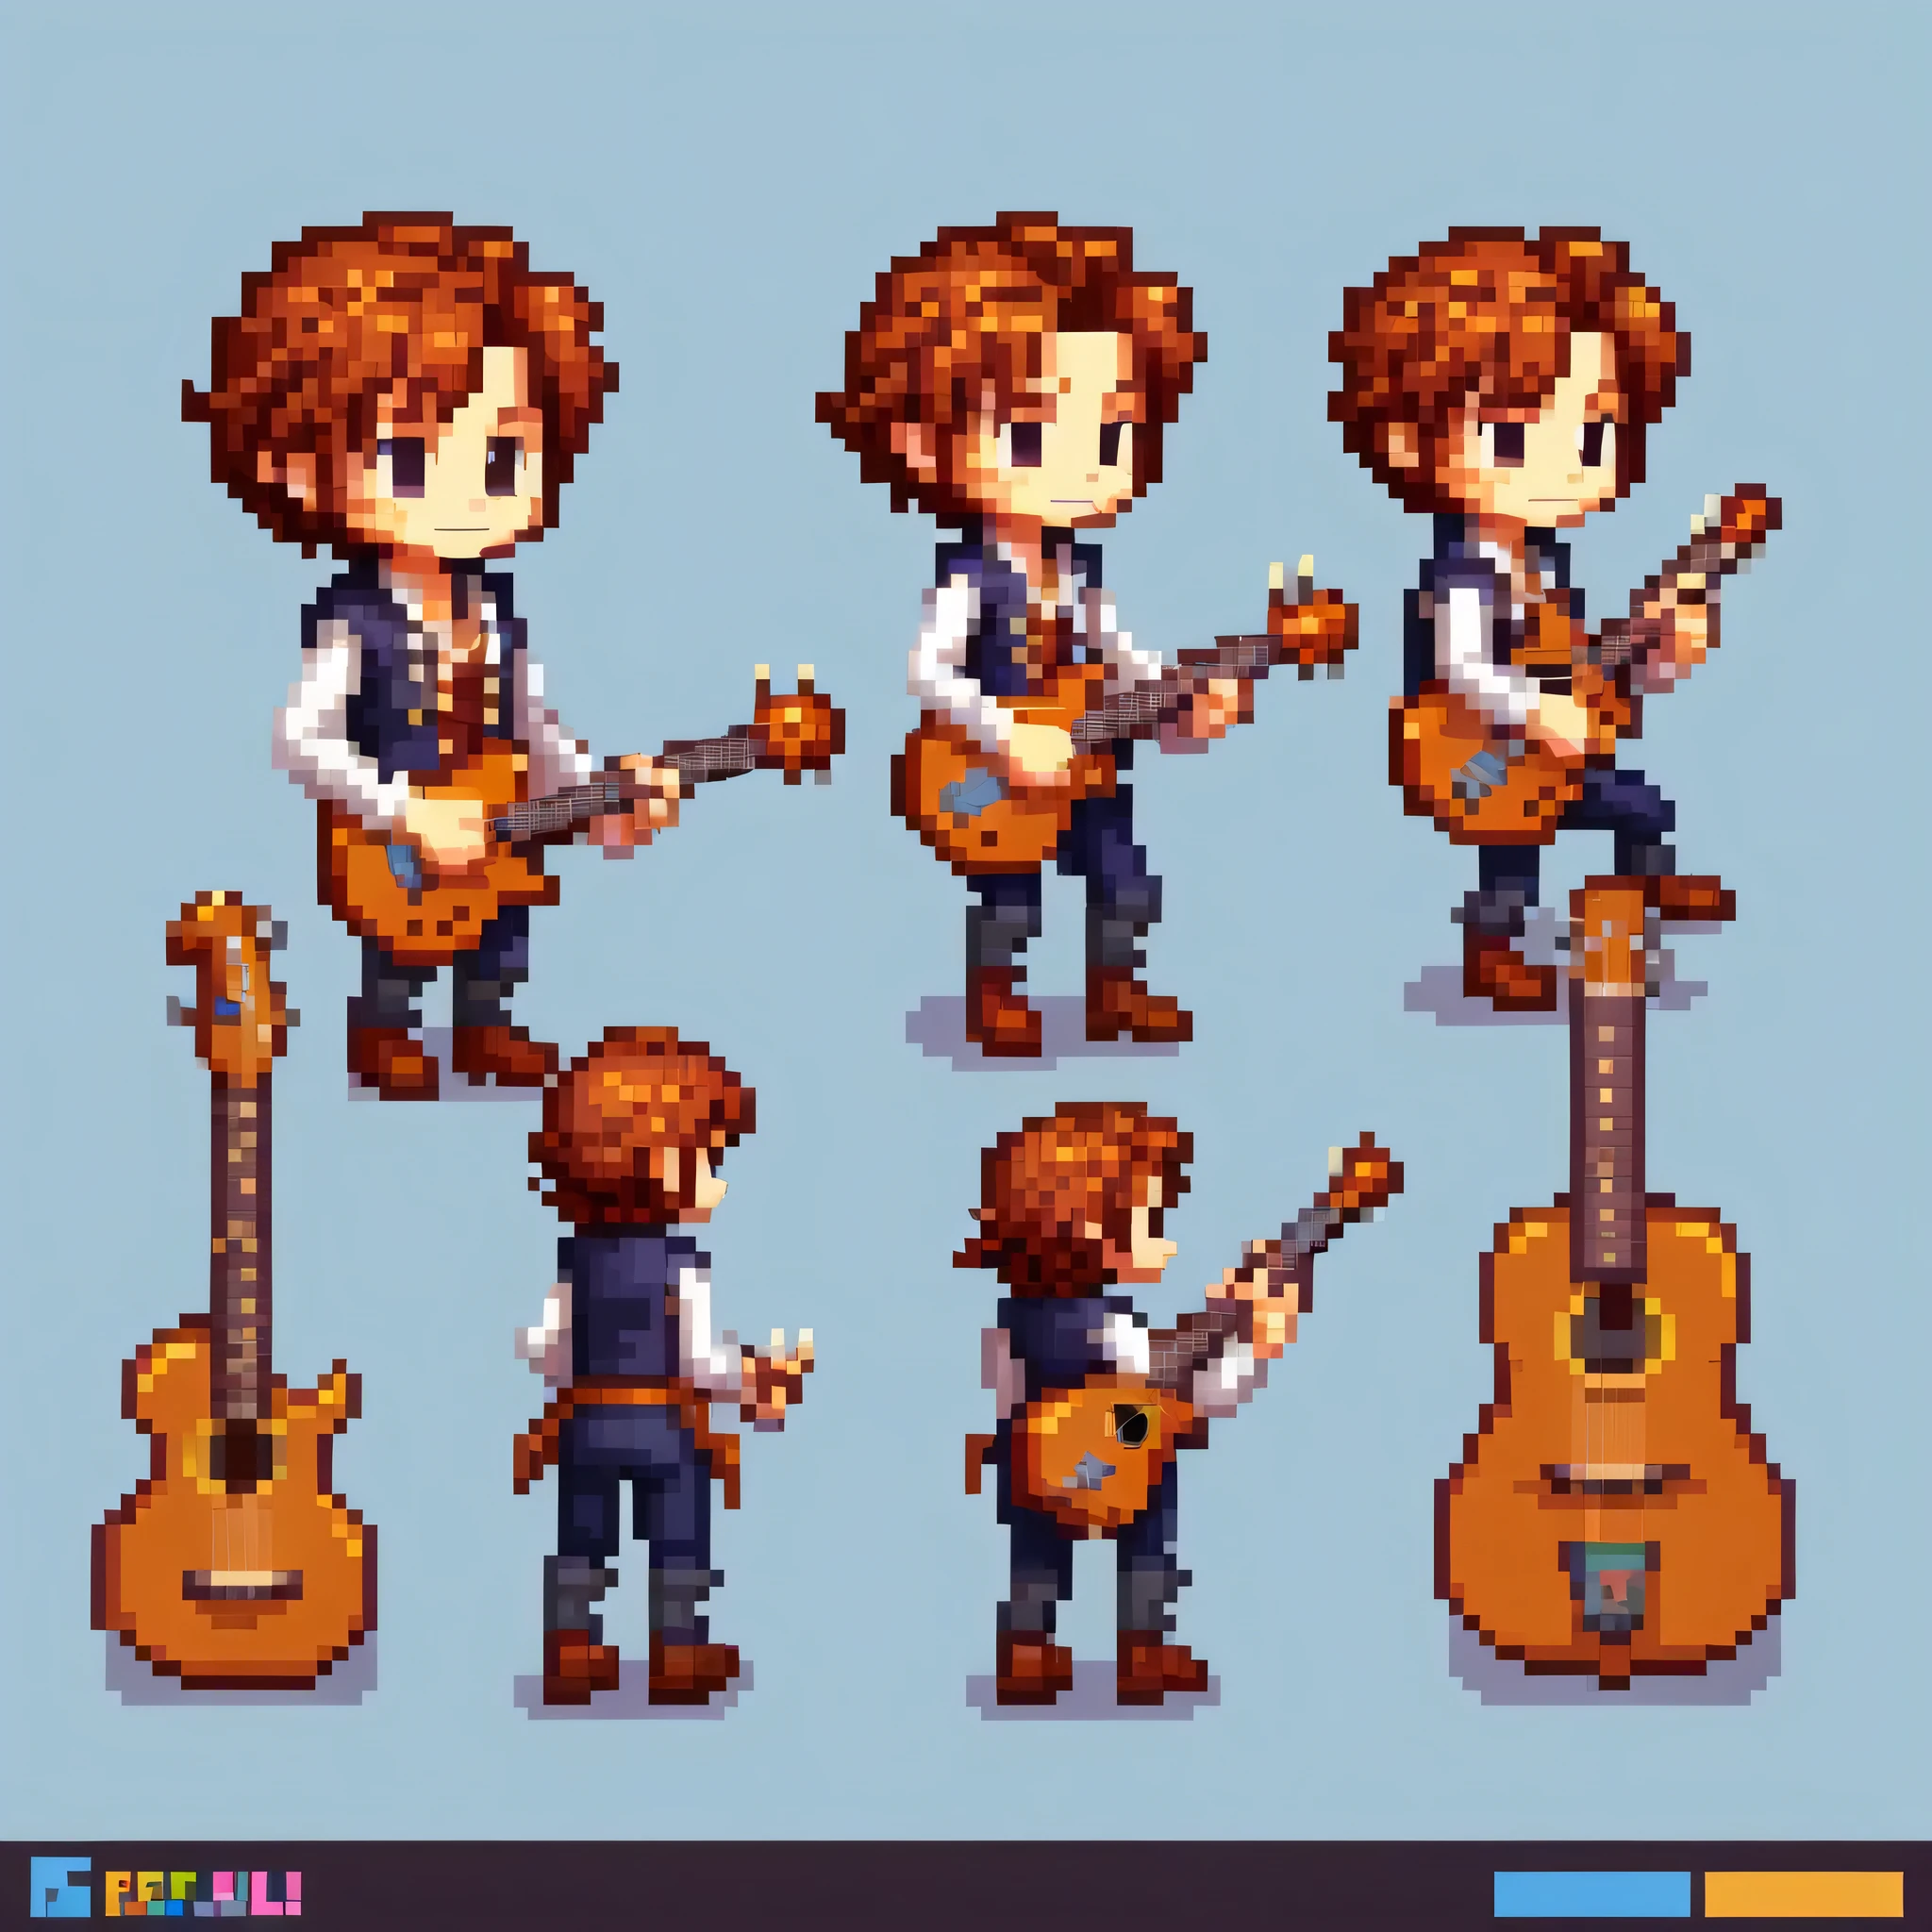 Pixel art,Pixel art,Create an original character design sheet,main character of the game,boy,juvenile,natural perm,,musical instrument,bard,Note,sing,play,((3 views,whole body, background,multiple views,High resolution)),multiple views,multiple poses,Active,action pose,dynamic,nice,cute,masterpiece,highest quality,In detail,Gracefully,RPG,Famicom,multiple characters,multiple costumes,Final Fantasy,boldly,effect icon,Item Icon